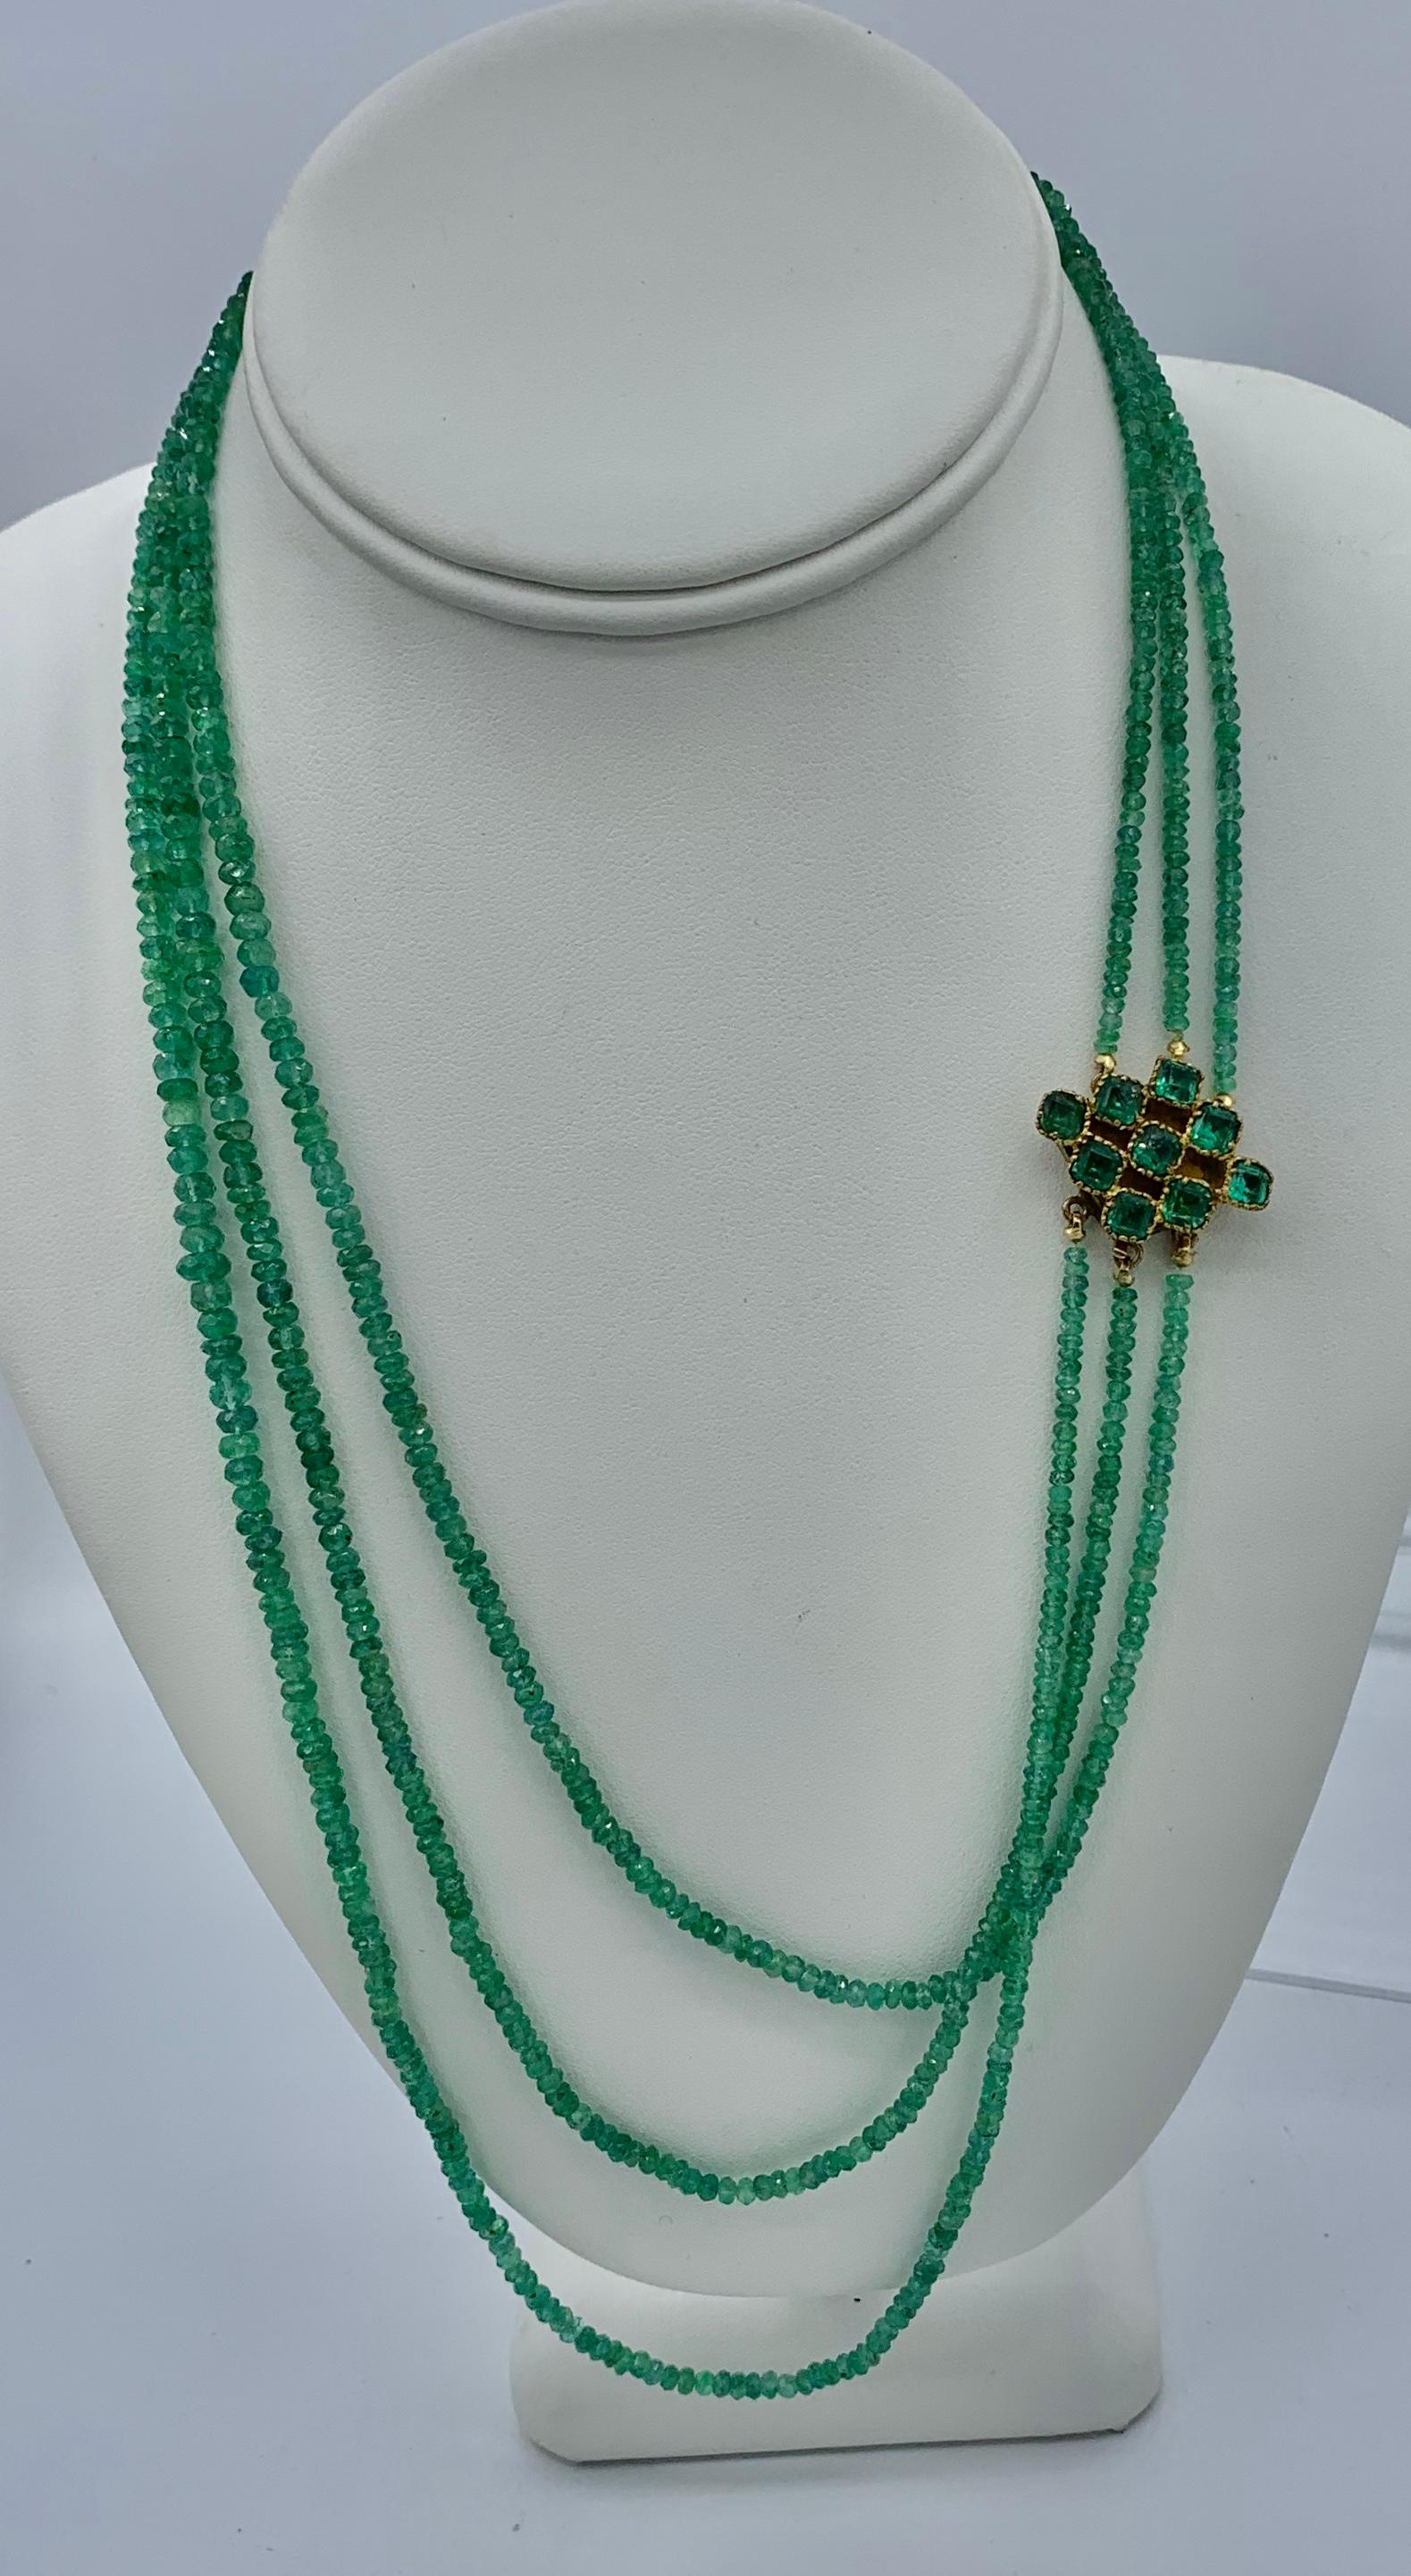 This is a radiant Emerald Necklace with Three Strands of Graduated Sparkling Natural Mined Emerald Beads with a fabulous Emerald clasp.  The Emerald Necklace is 22 inches (55 cm) long with the shortest strand. The clasp is set with nine square cut